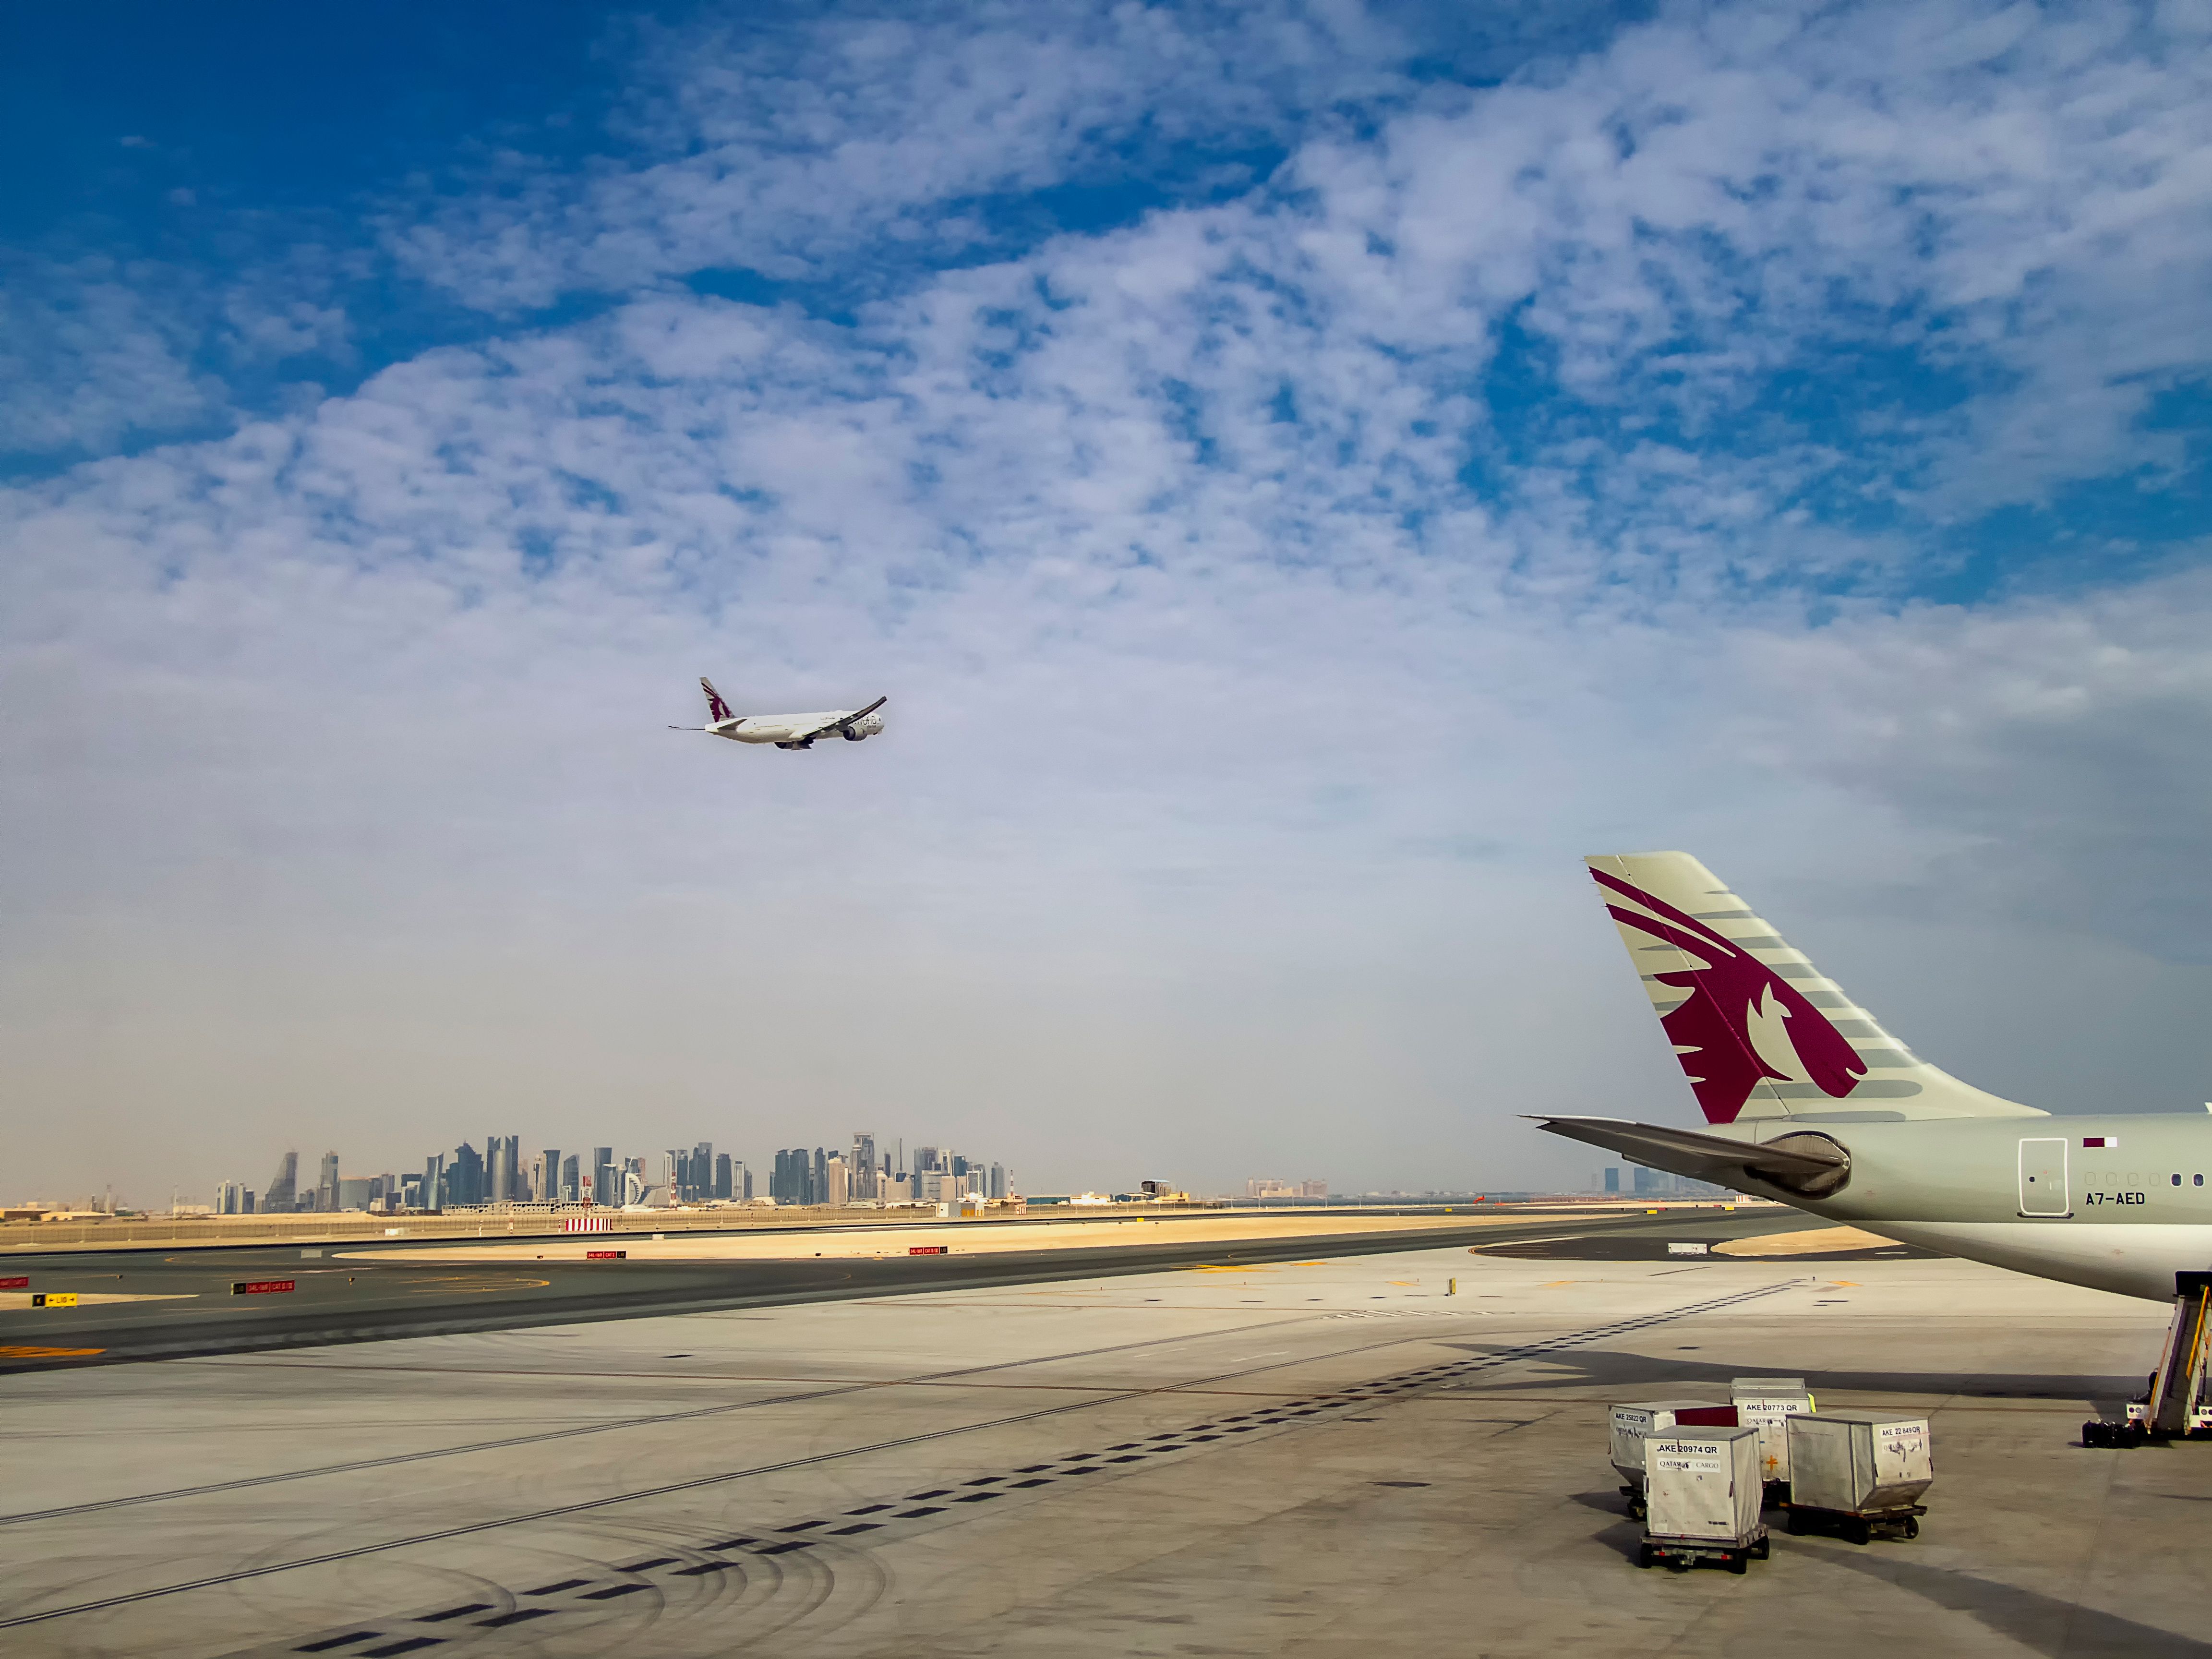 Multiple Qatar Airways aircraft in the sky and on the apron at Doha's Hamad International Airport.